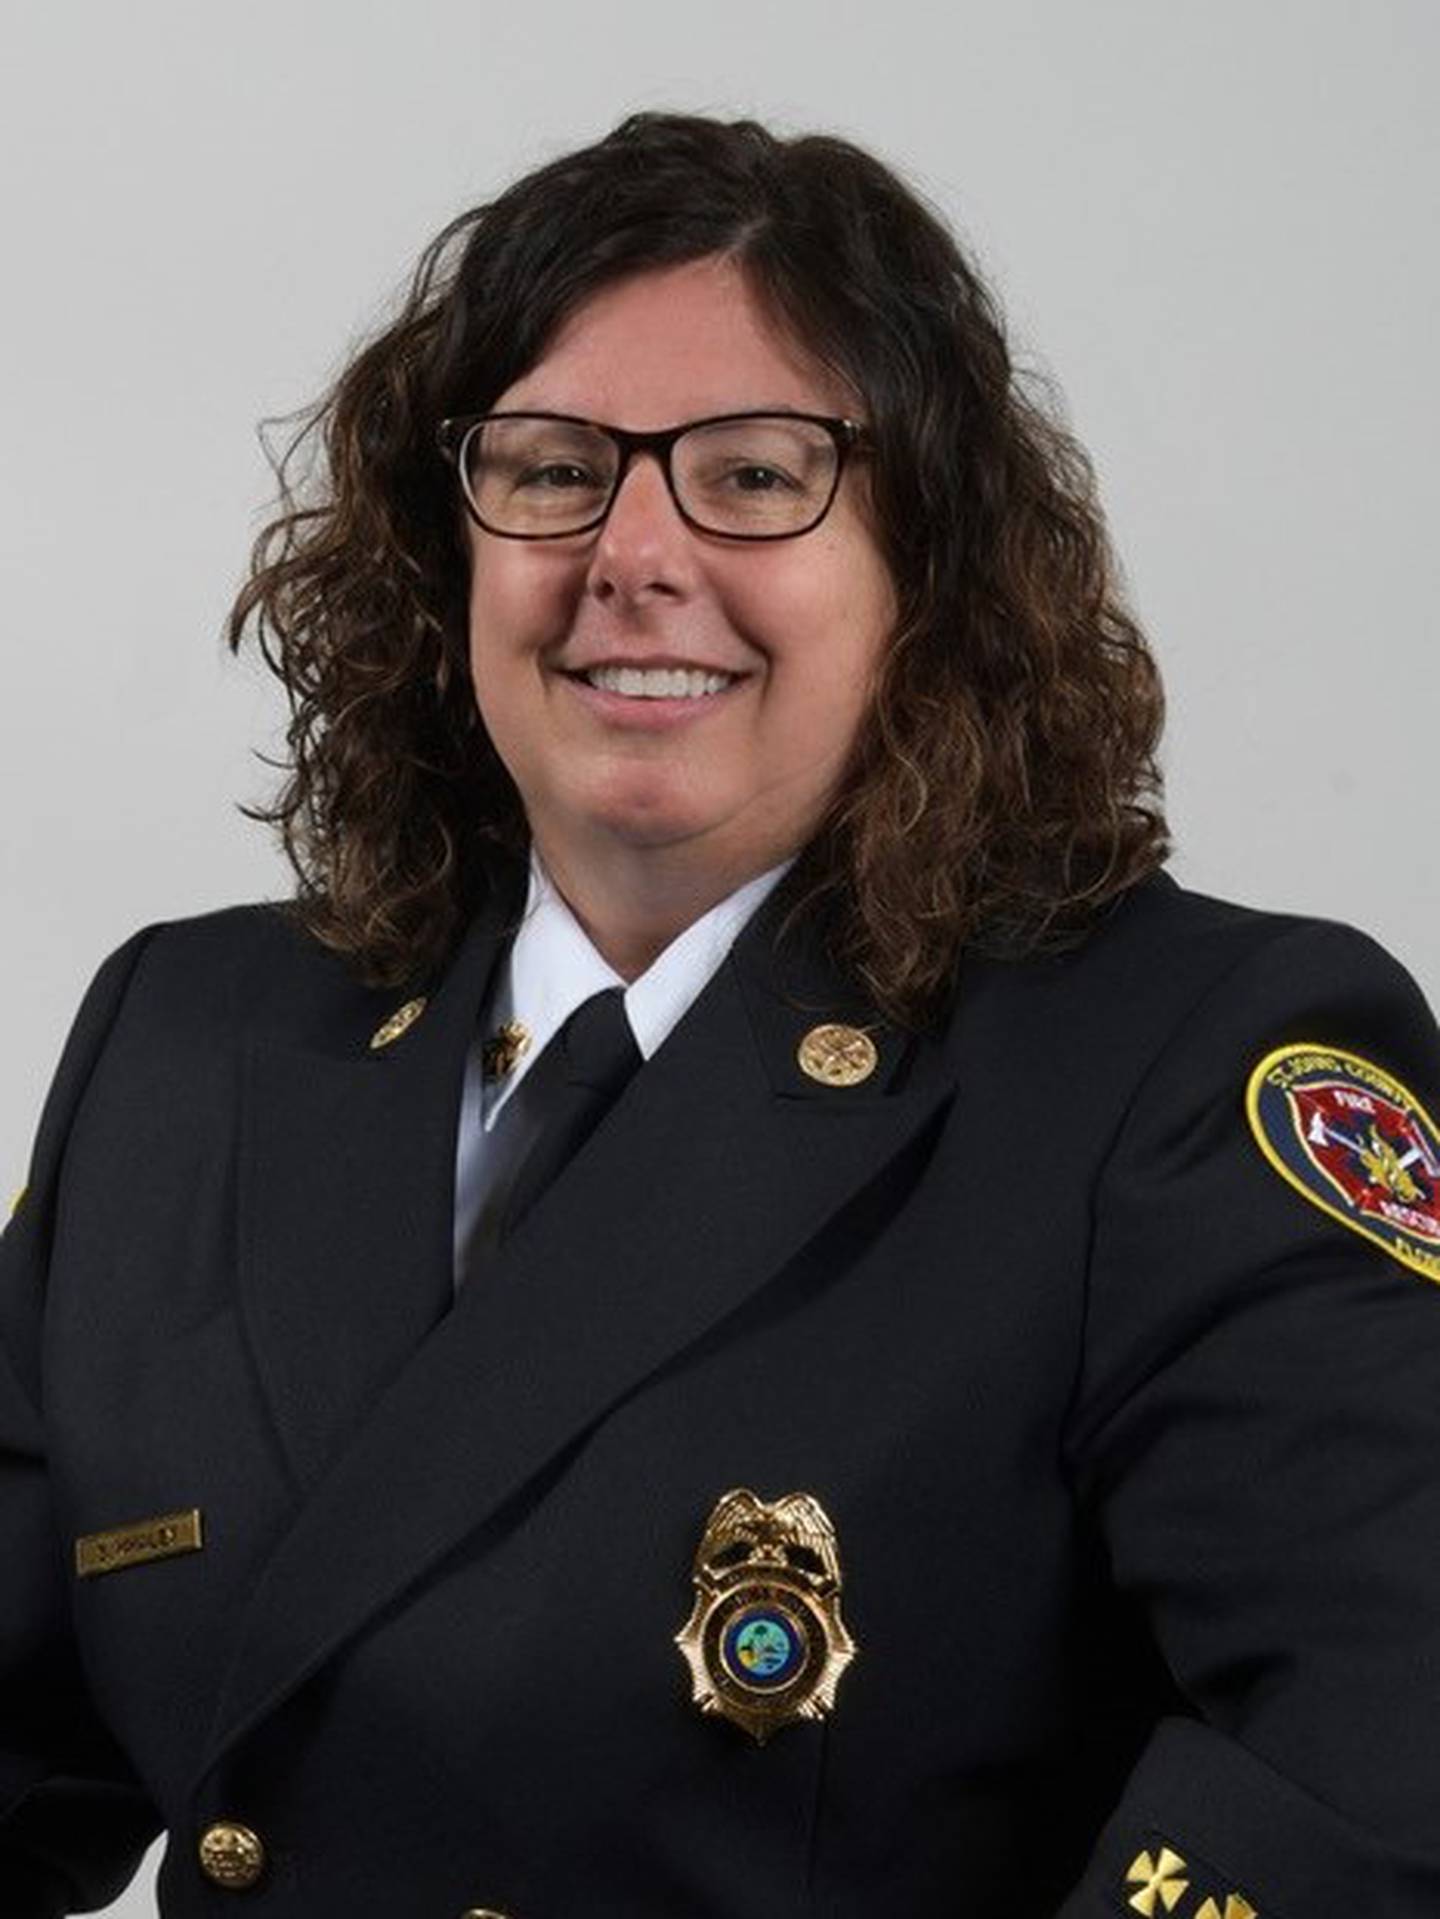 Deputy Chief Stephanie Whaley will serve as Acting Assistant Chief.